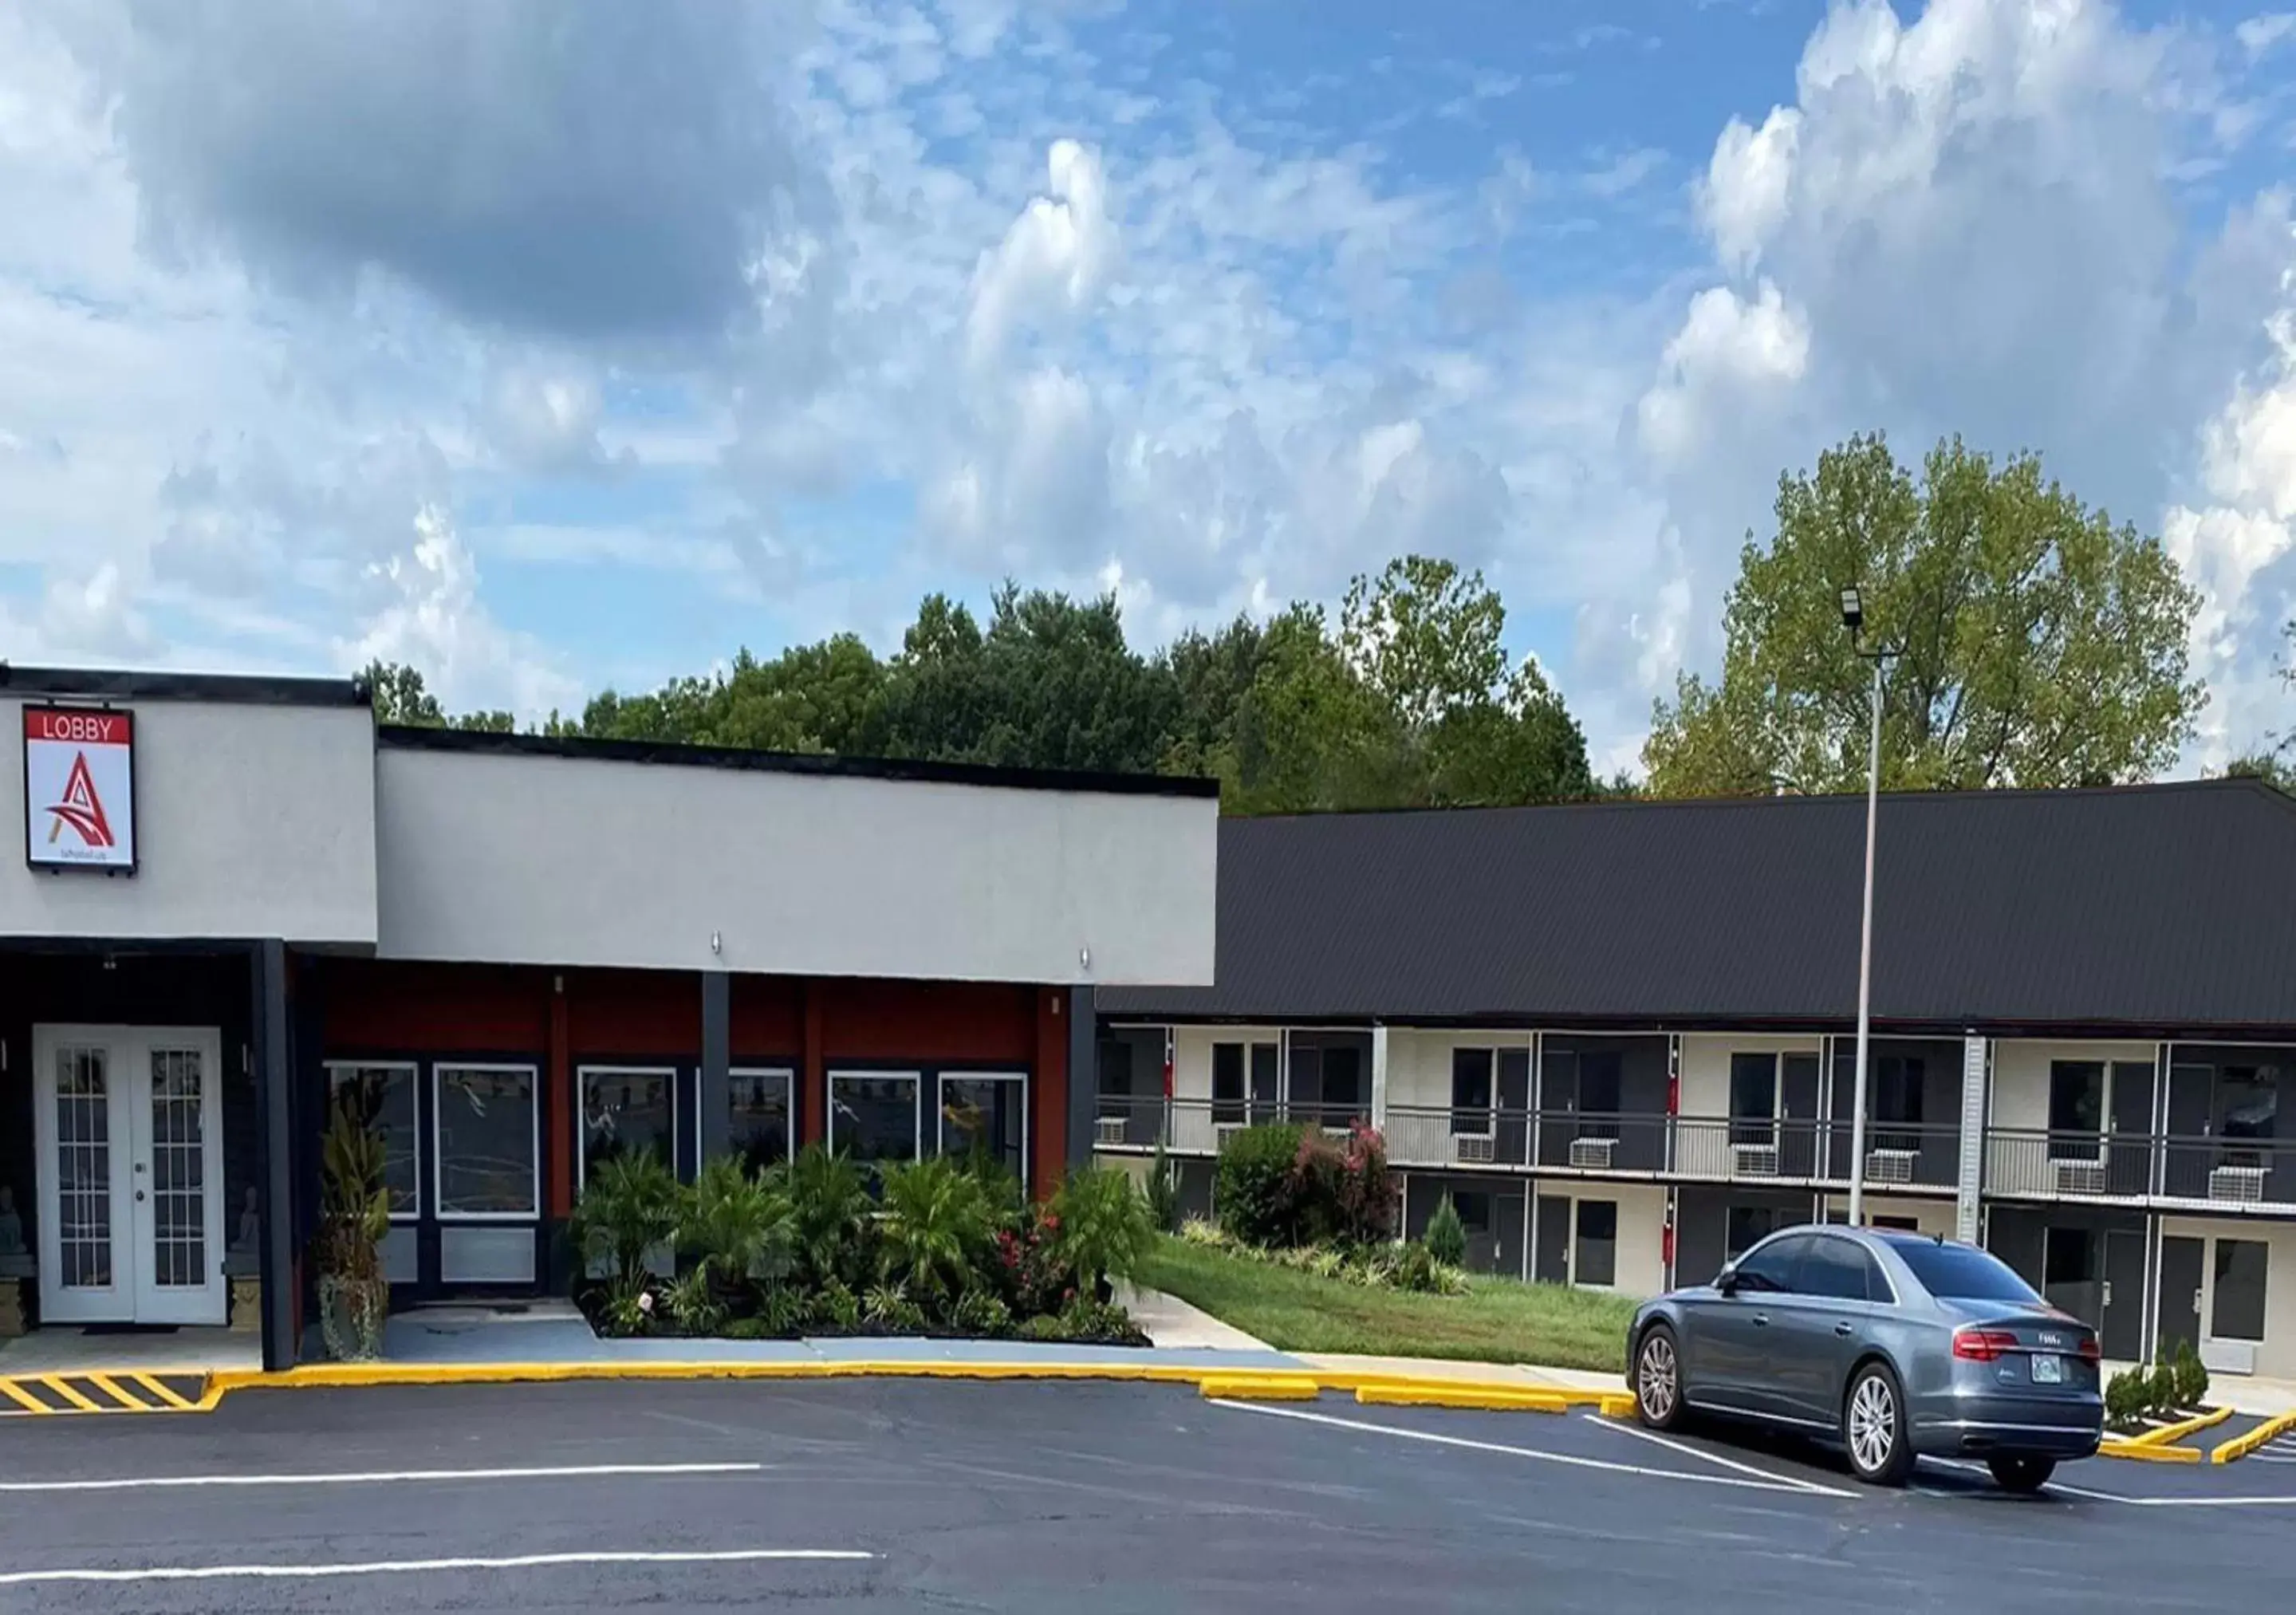 Property Building in Lx Hotel, Manchester, Tennessee